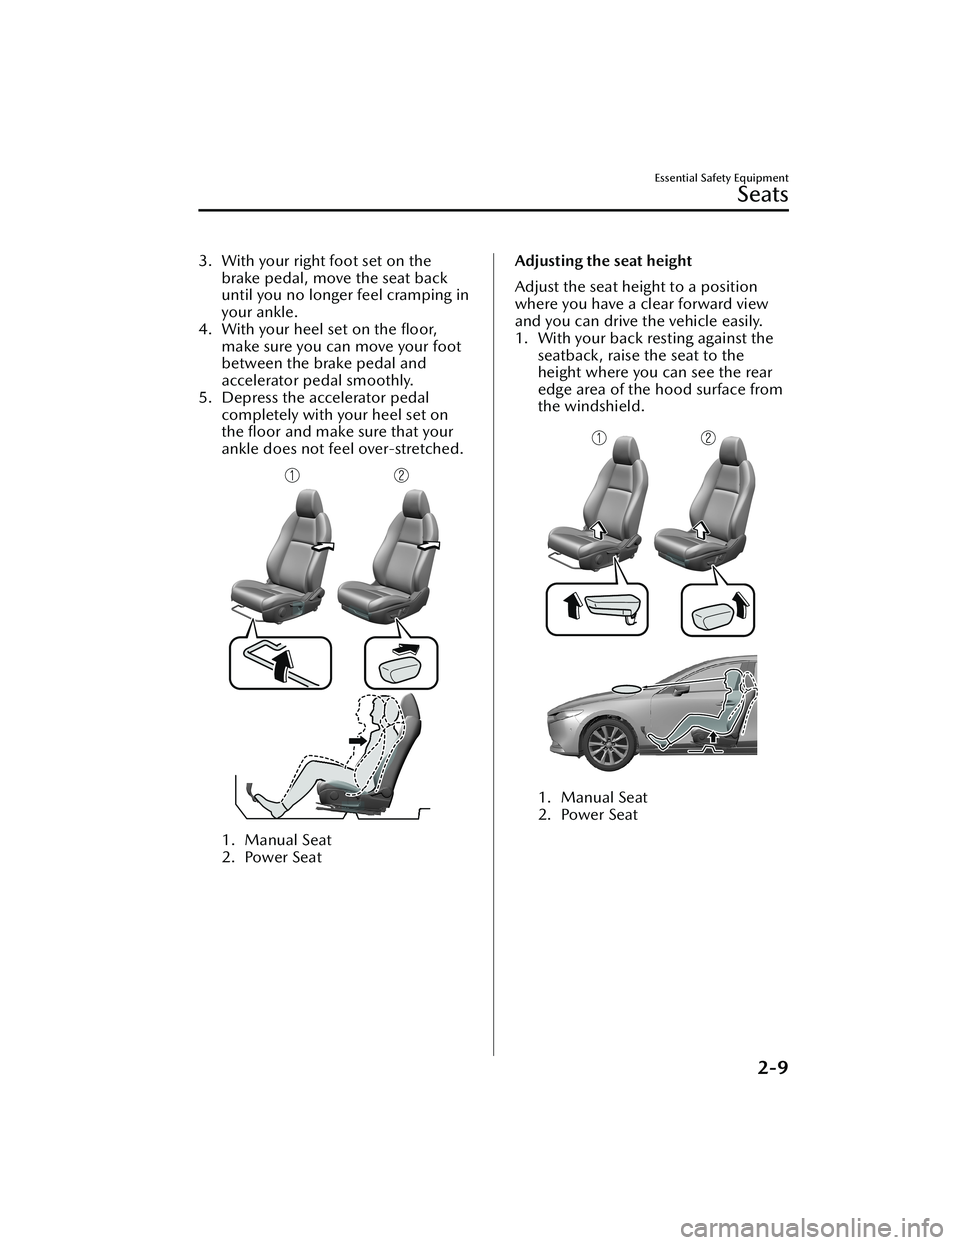 MAZDA MODEL 3 SEDAN 2022  Owners Manual 3. With your right foot set on thebrake pedal, move the seat back
until you no longer feel cramping in
your ankle.
4. With your heel set on the ﬂoor, make sure you can move your foot
between the bra